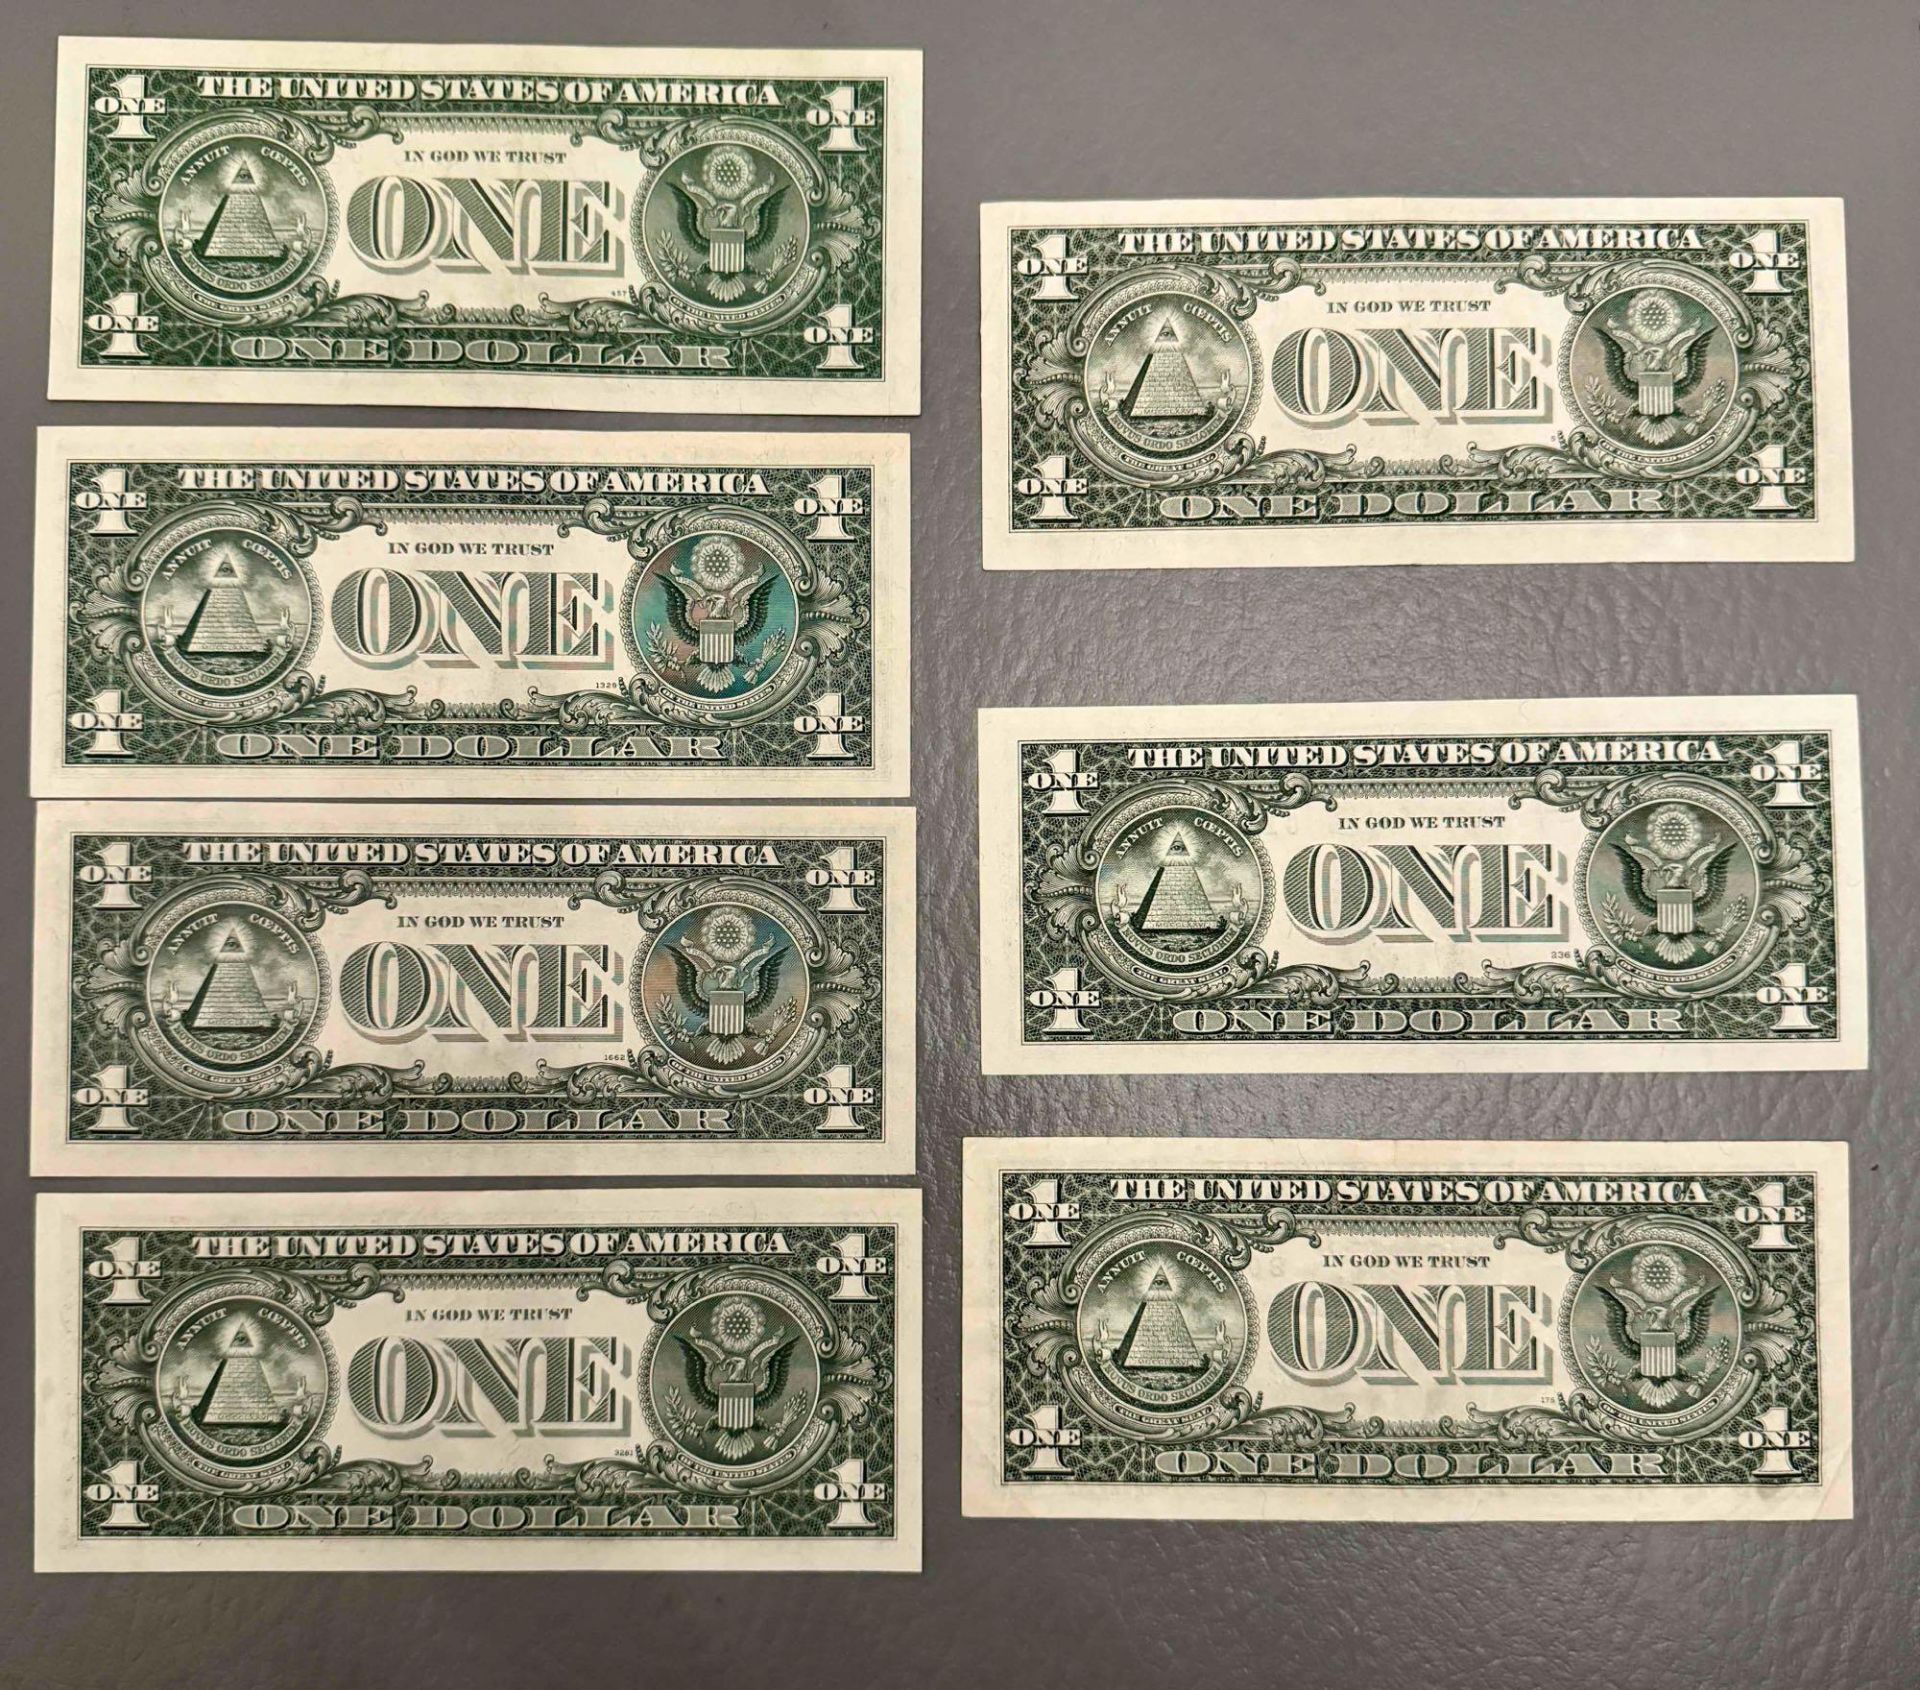 Currency uncirculated notes: 1999 $10 Star Note, 1976 First Day issue w/stamp $2 note, 1963 $1 Note, - Image 6 of 6